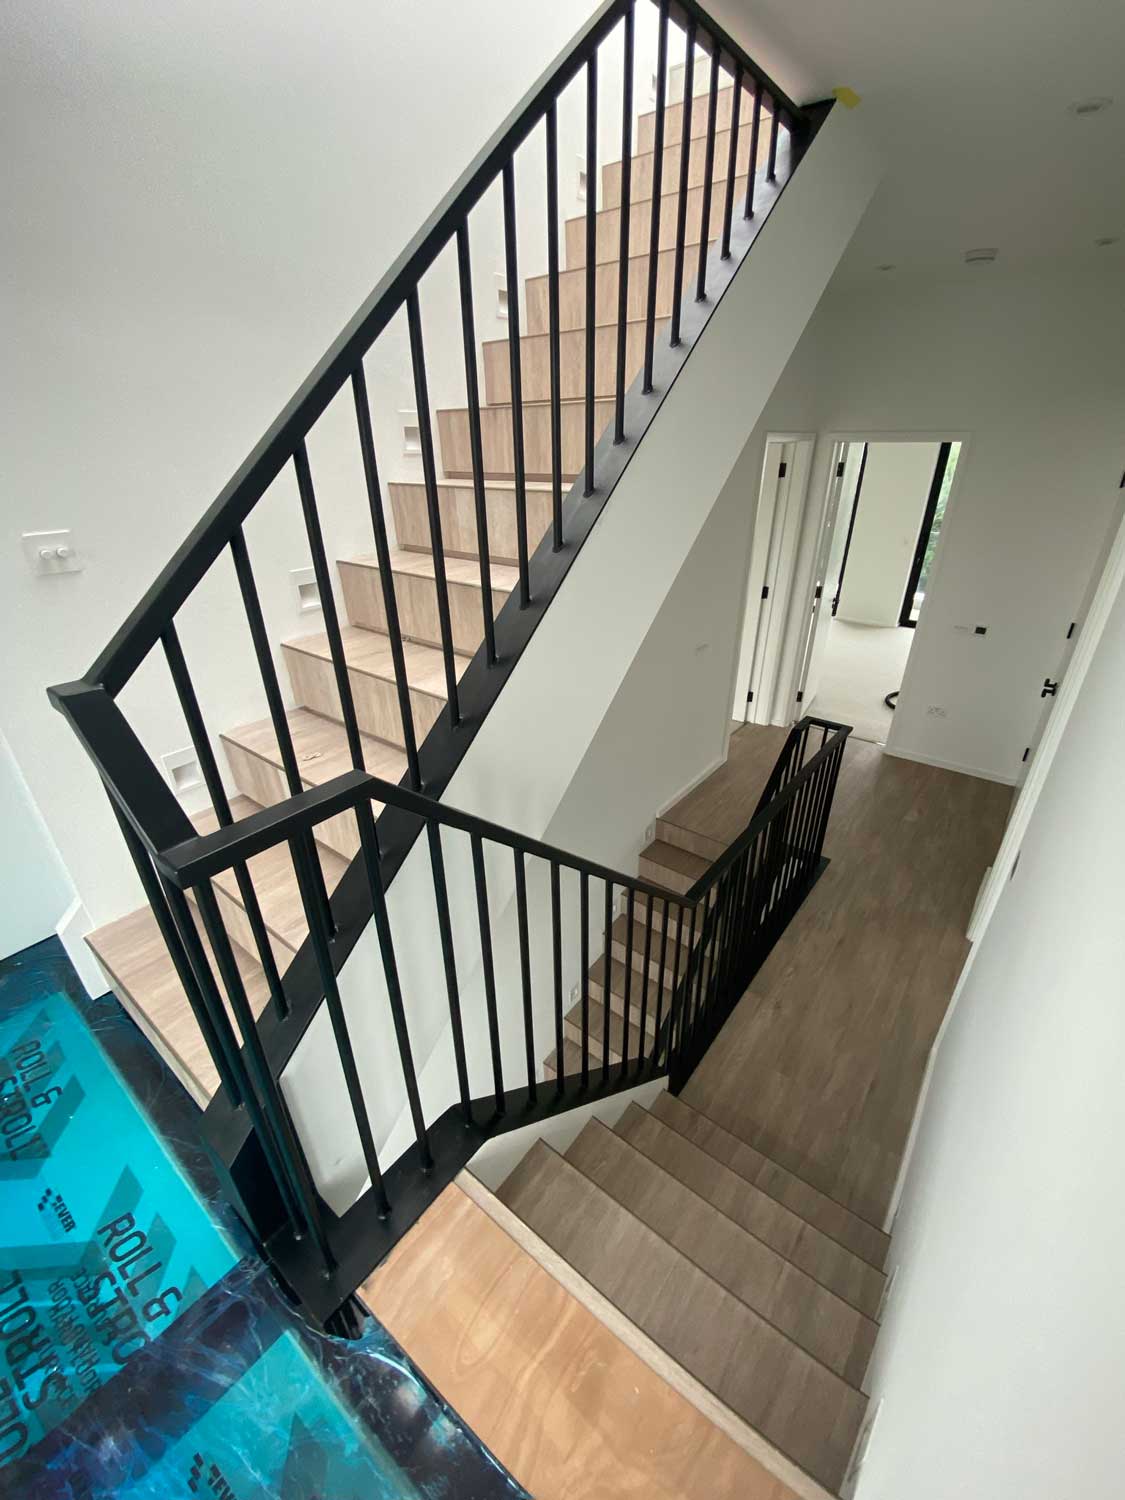 U-shaped staircase with metal spindles